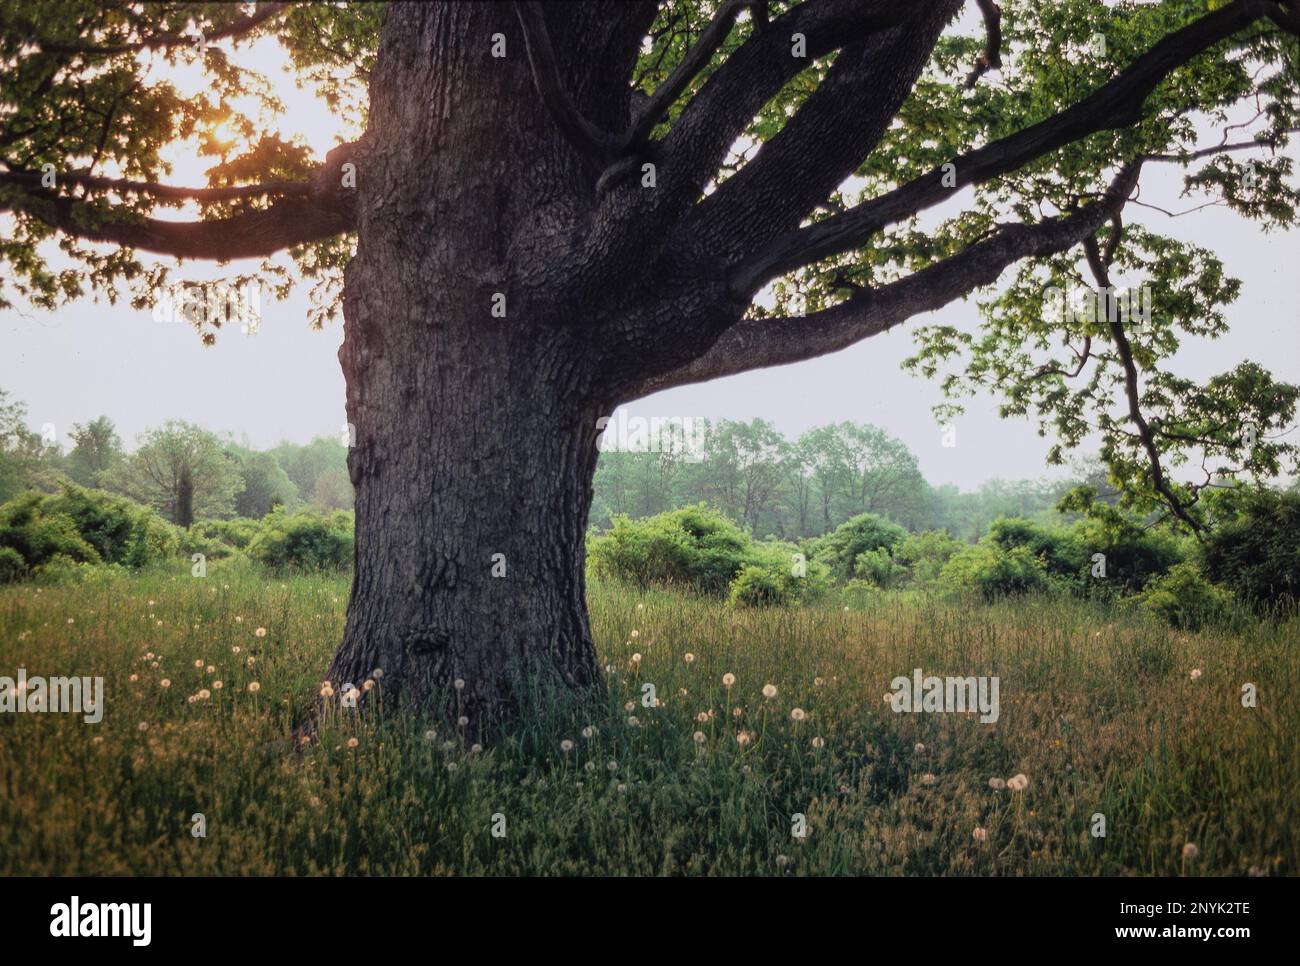 Eastern white oak tree sprawls out over grassy field backlit by warm summer sunset in central Connecticut Stock Photo